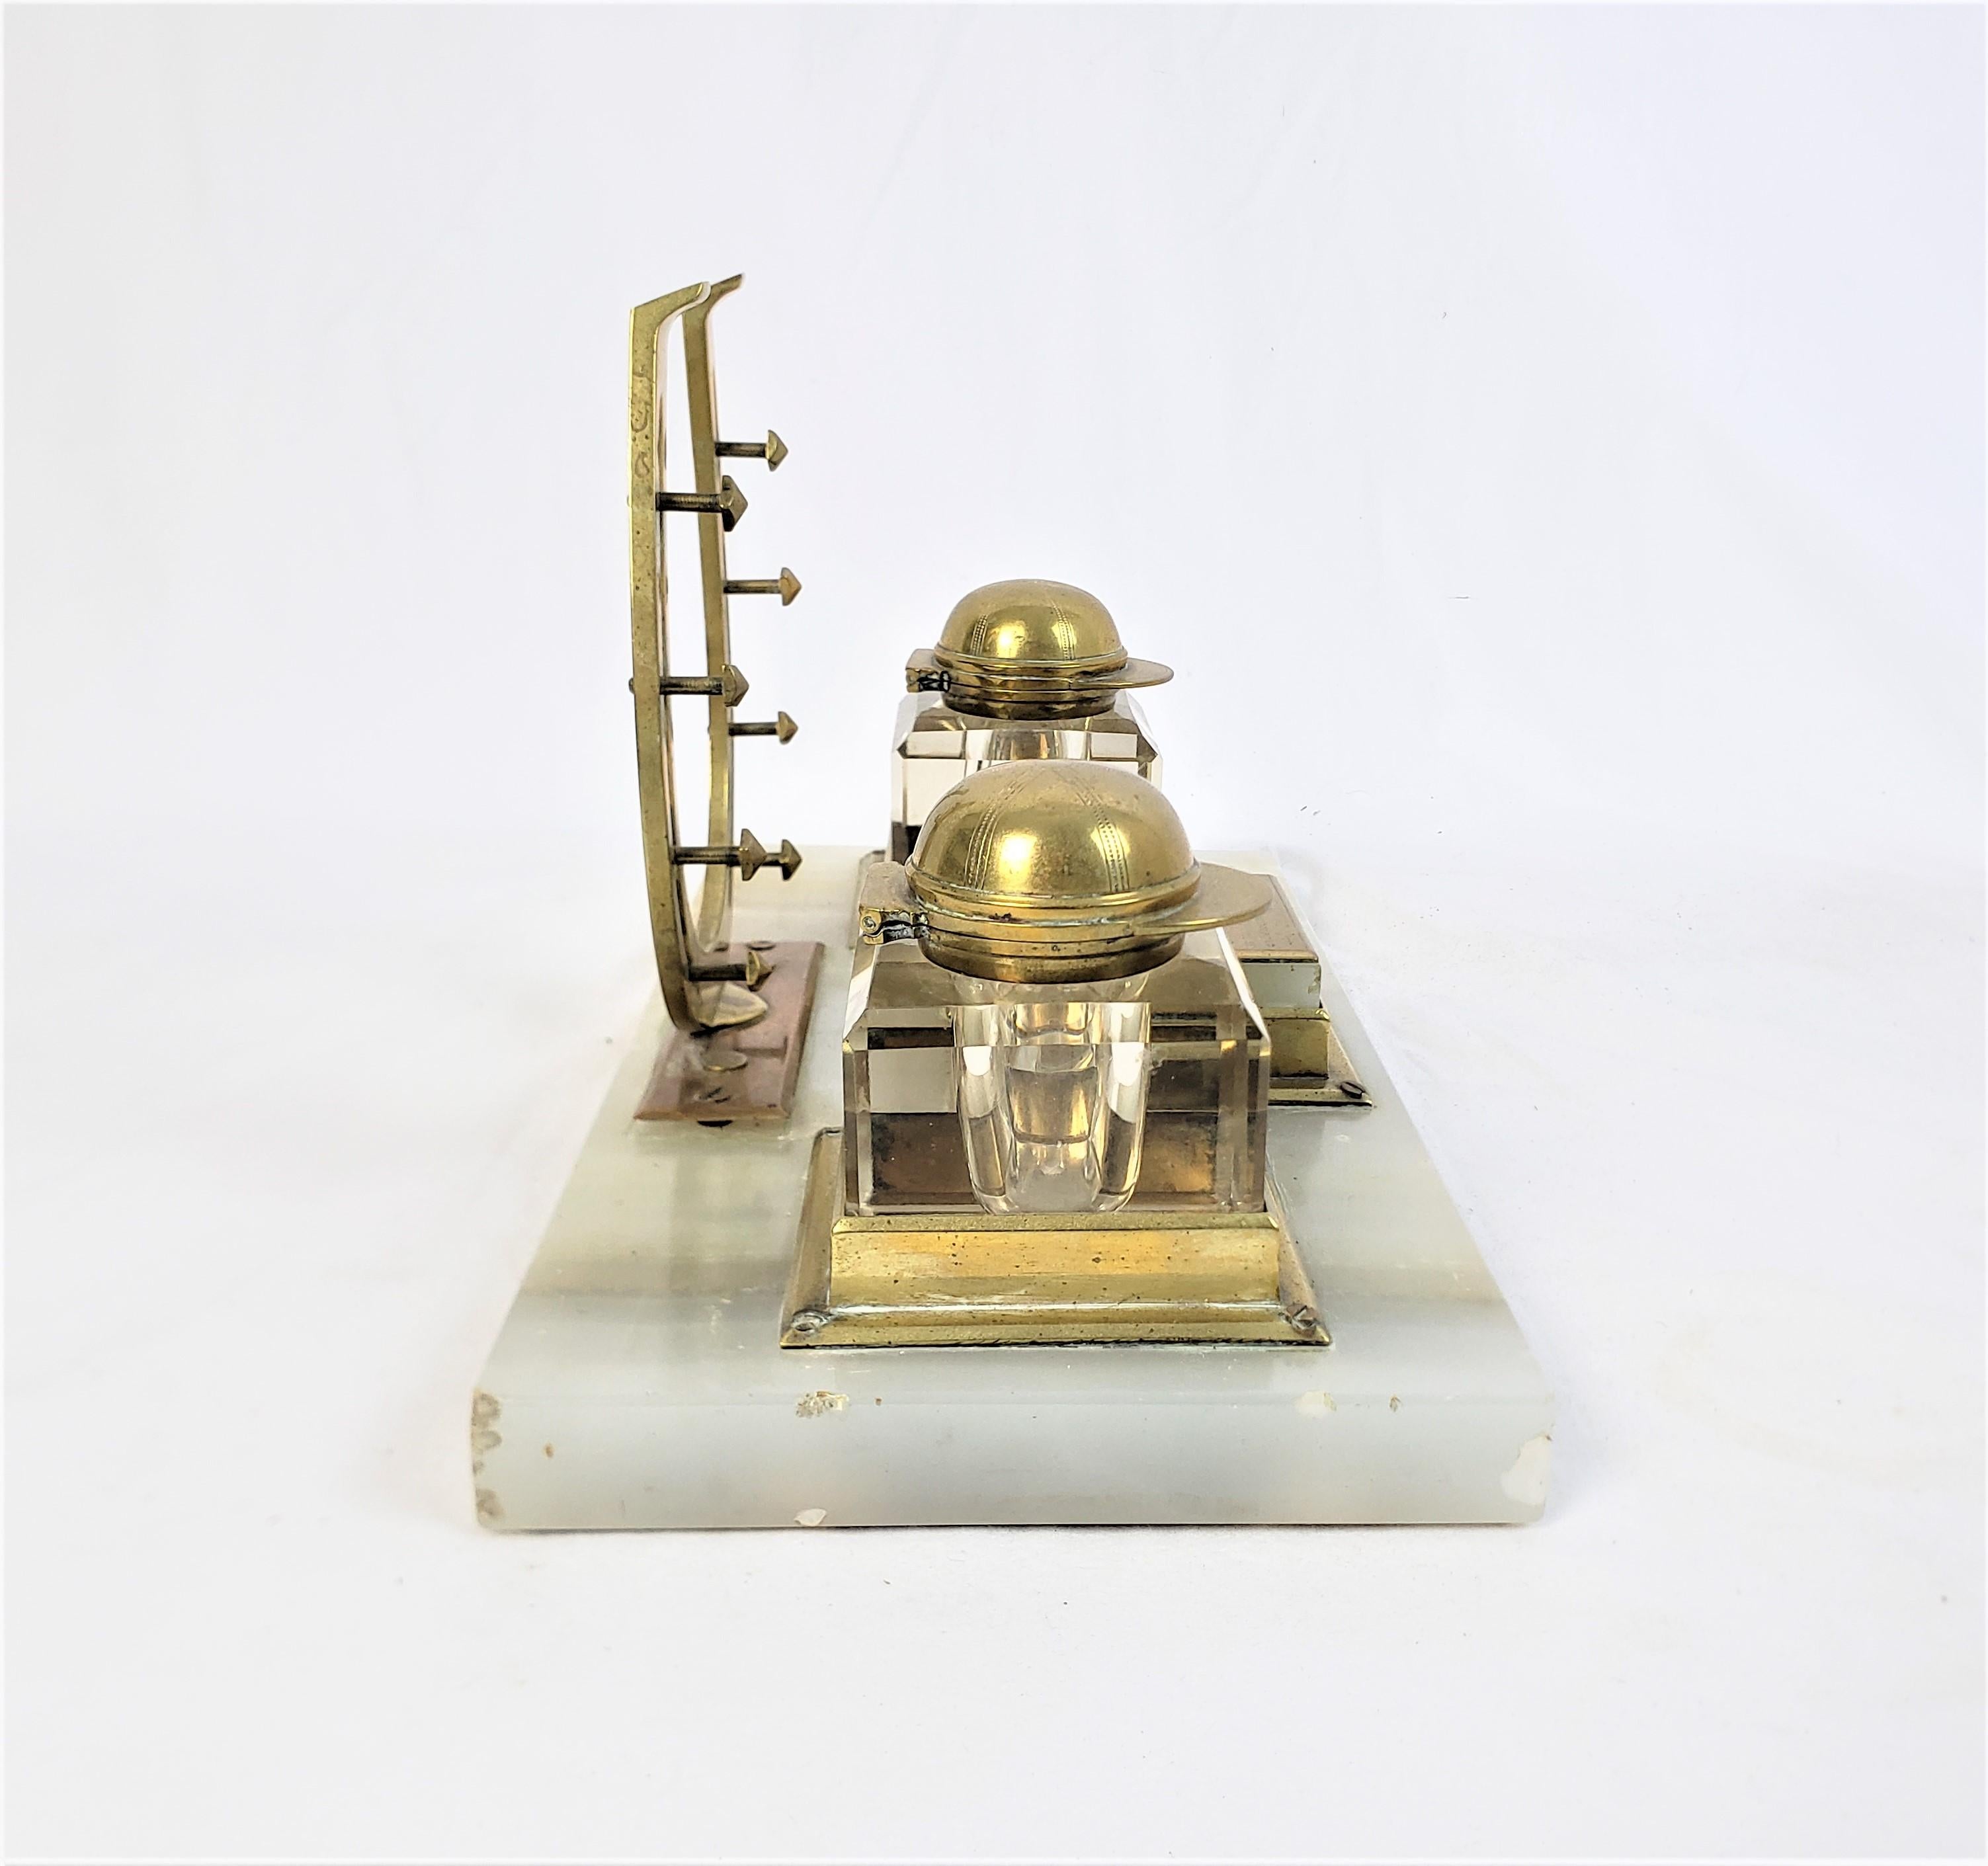 Antique English Presentation Inkwell & Desk Set with Horse Jockey Theme In Good Condition For Sale In Hamilton, Ontario